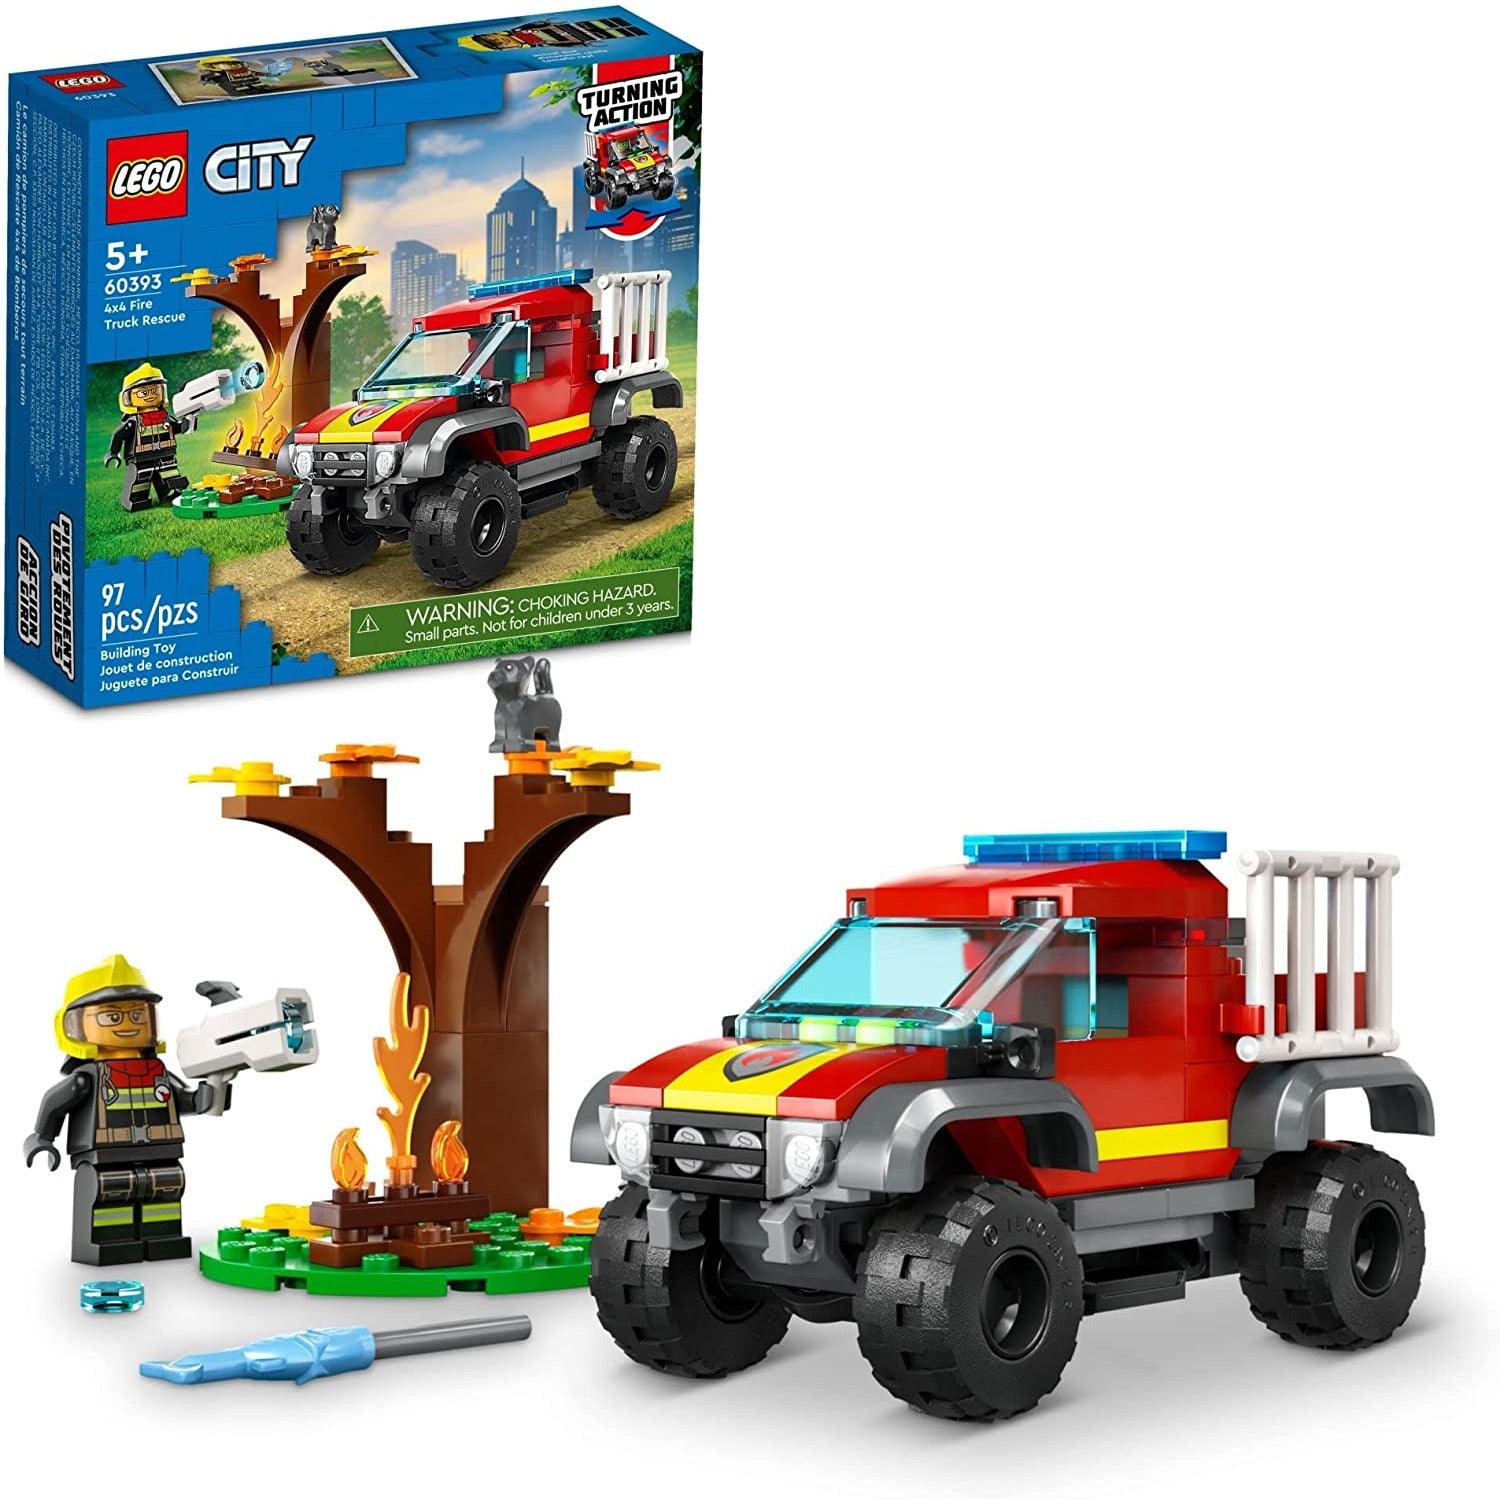 LEGO 60393 City 4x4 Fire Engine Rescue Truck , Set with Water Element Launcher, Firefighter Minifigure and Cat Figure (97)